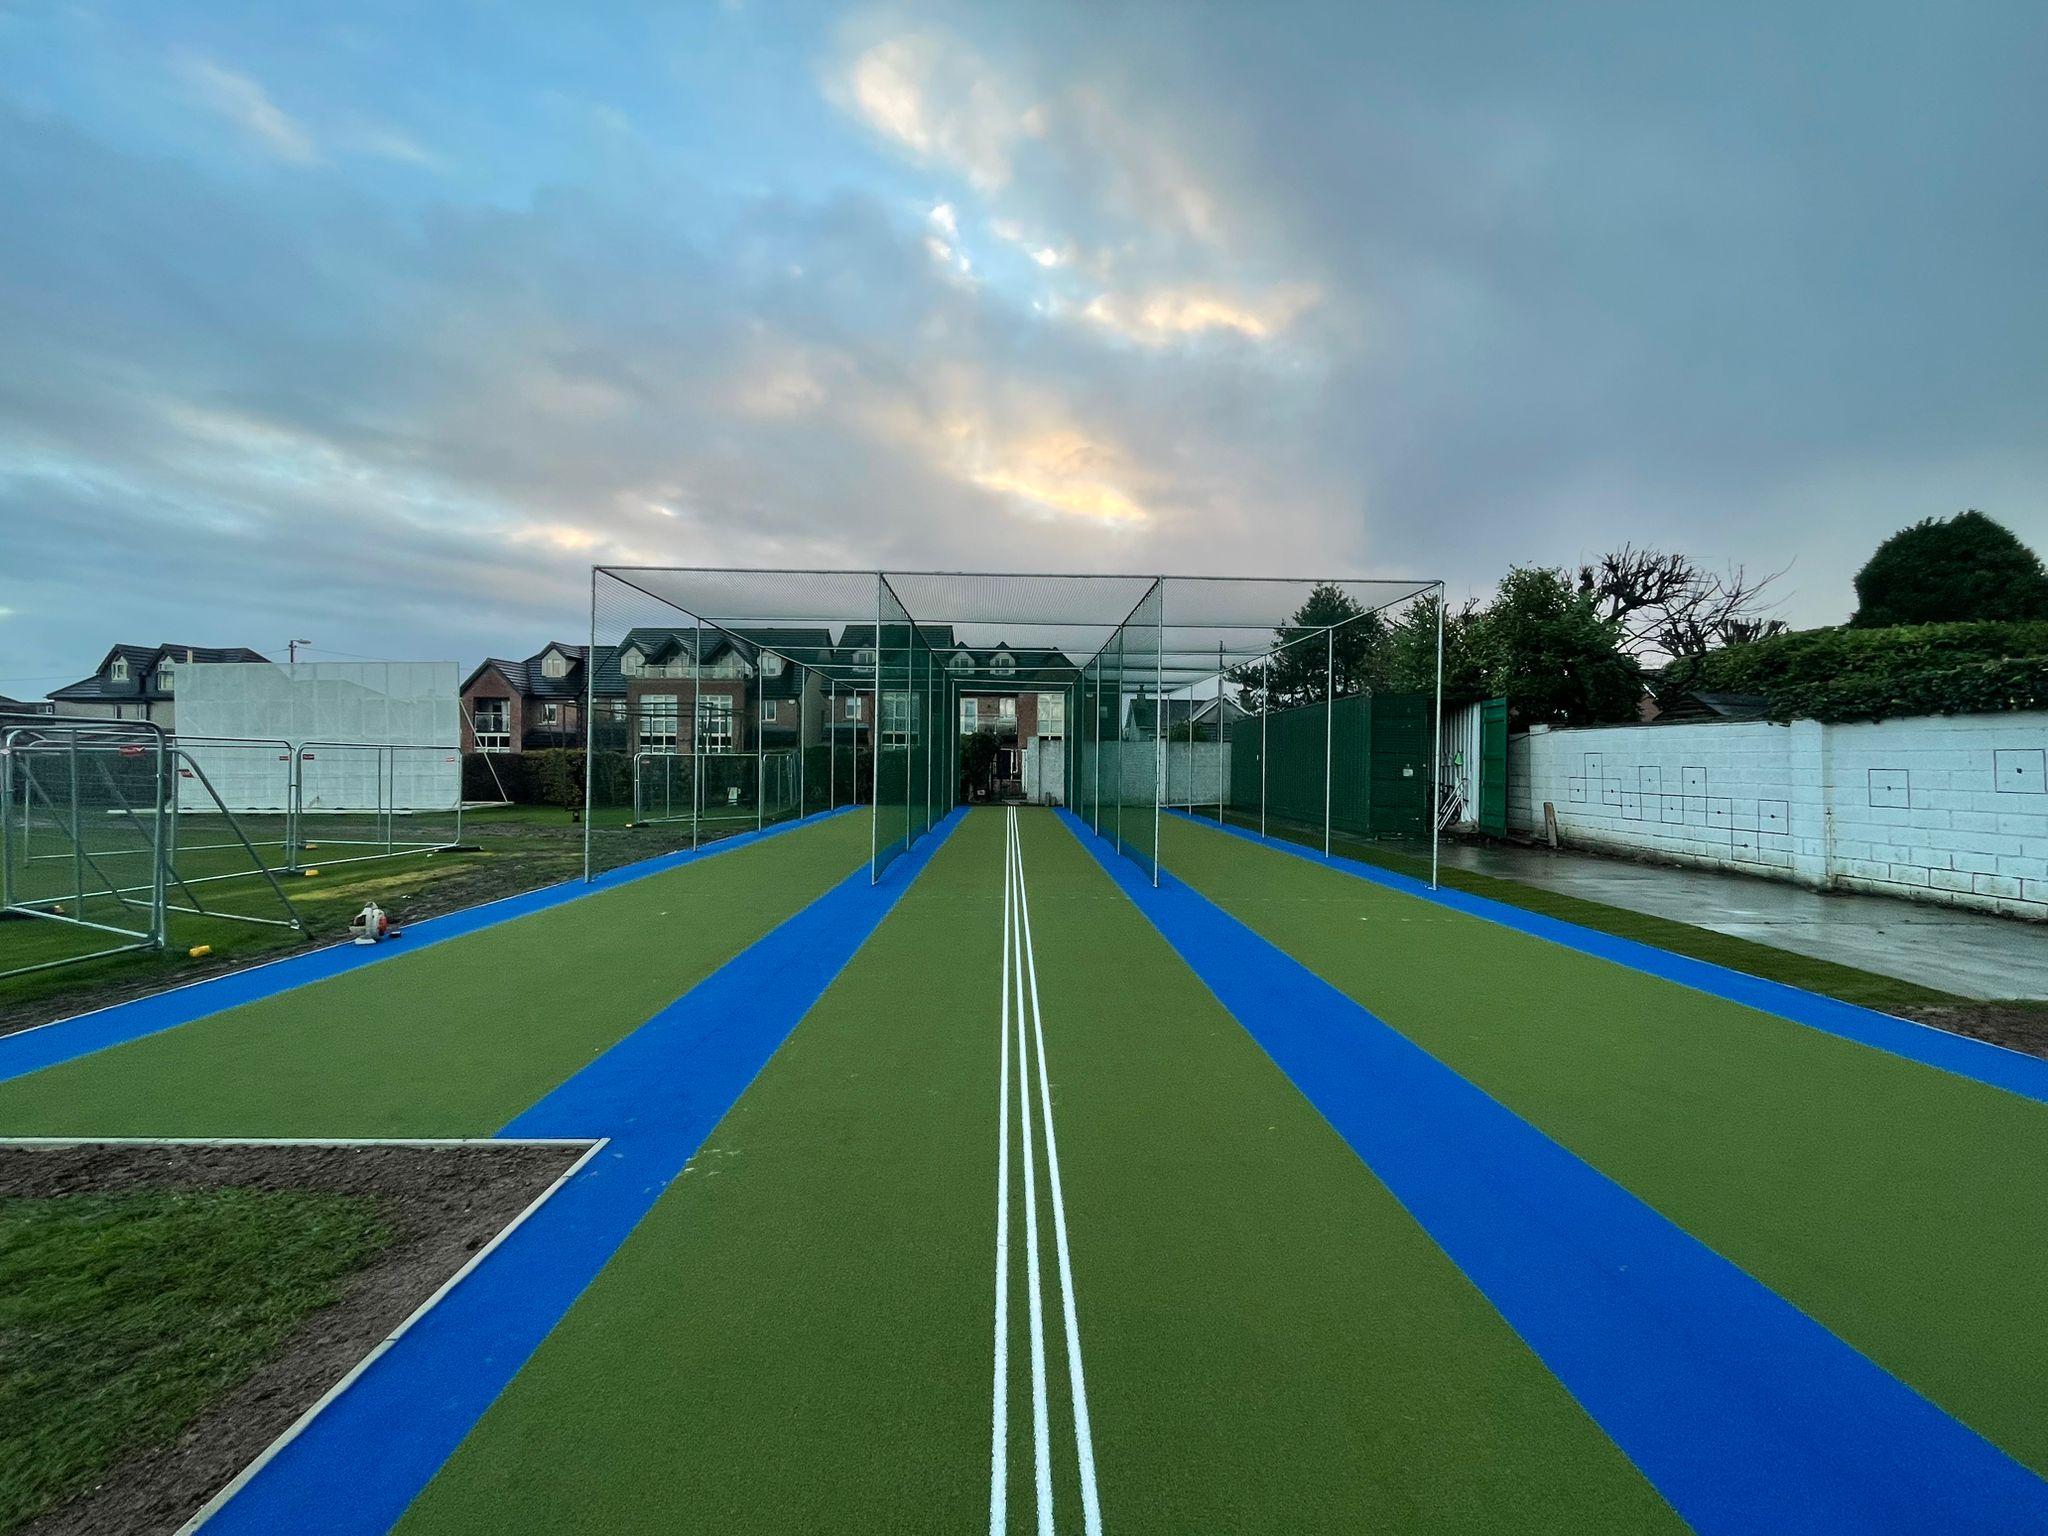 Cricket Pitch Blue and Green Carpet